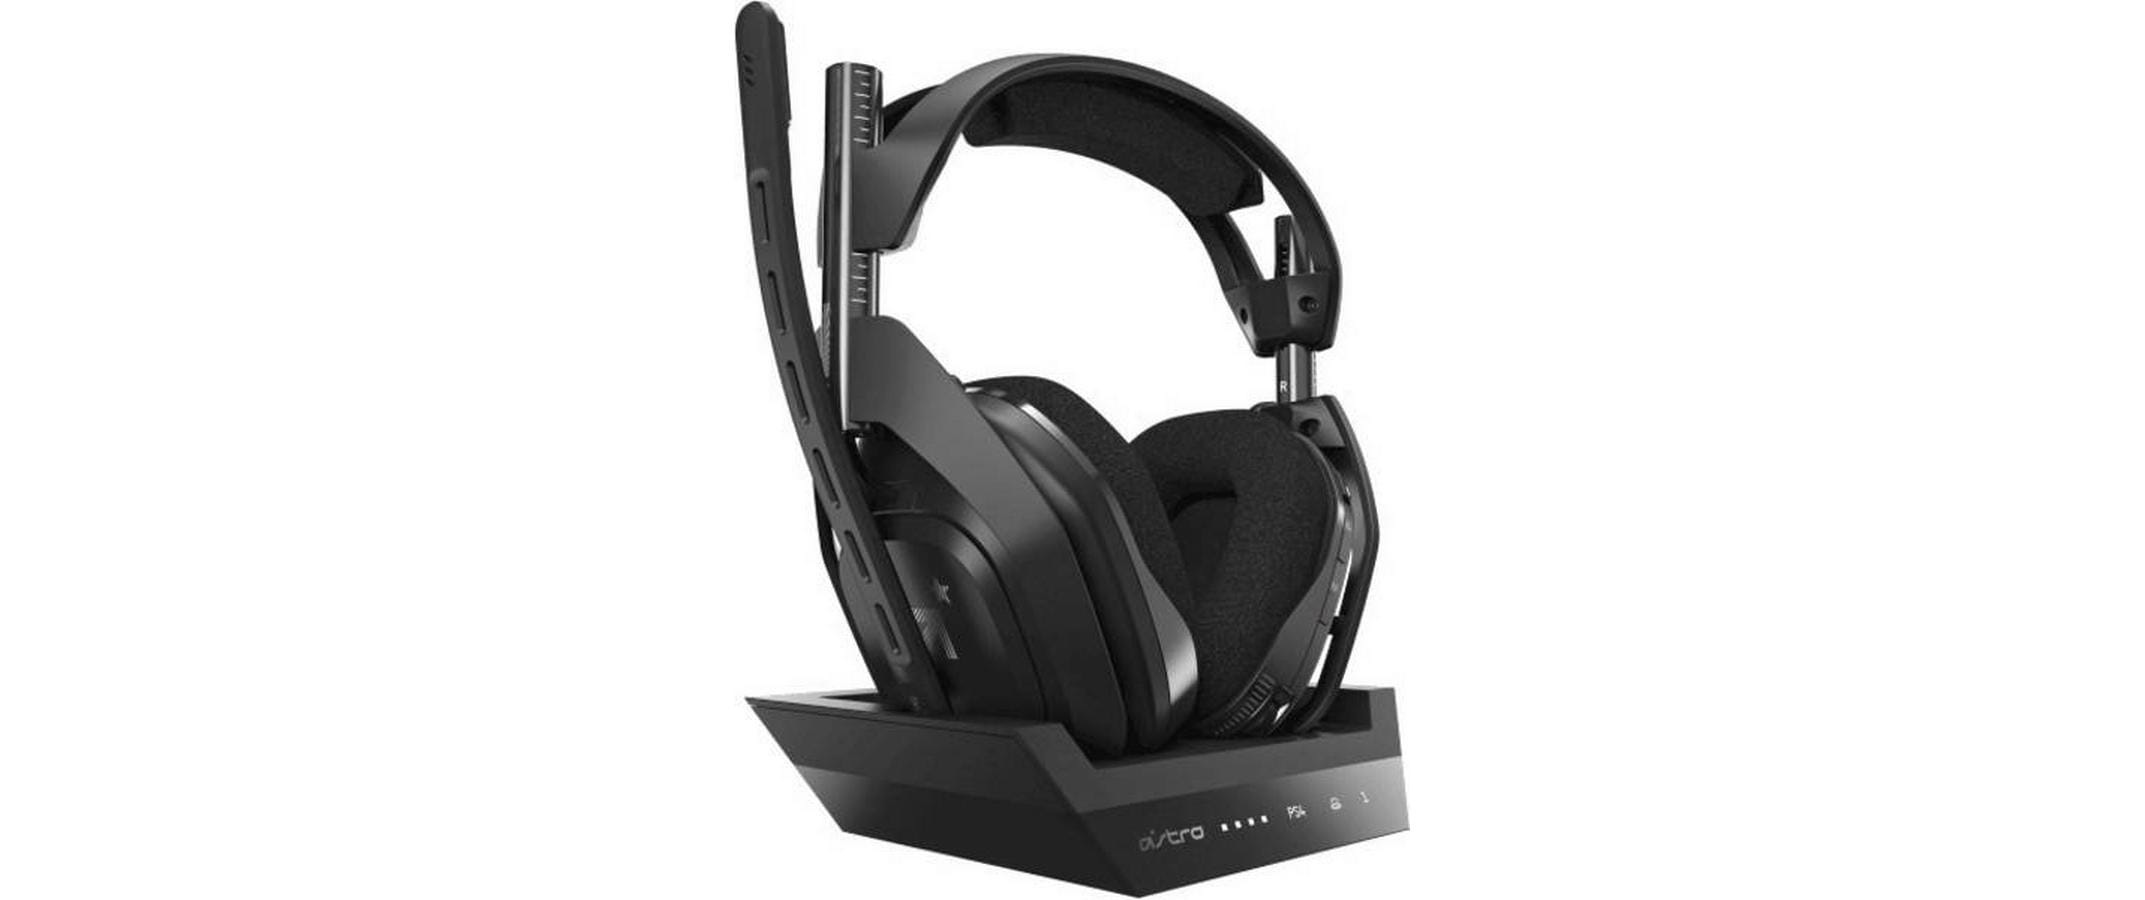 Gaming-Headset »A50 Headset blk«